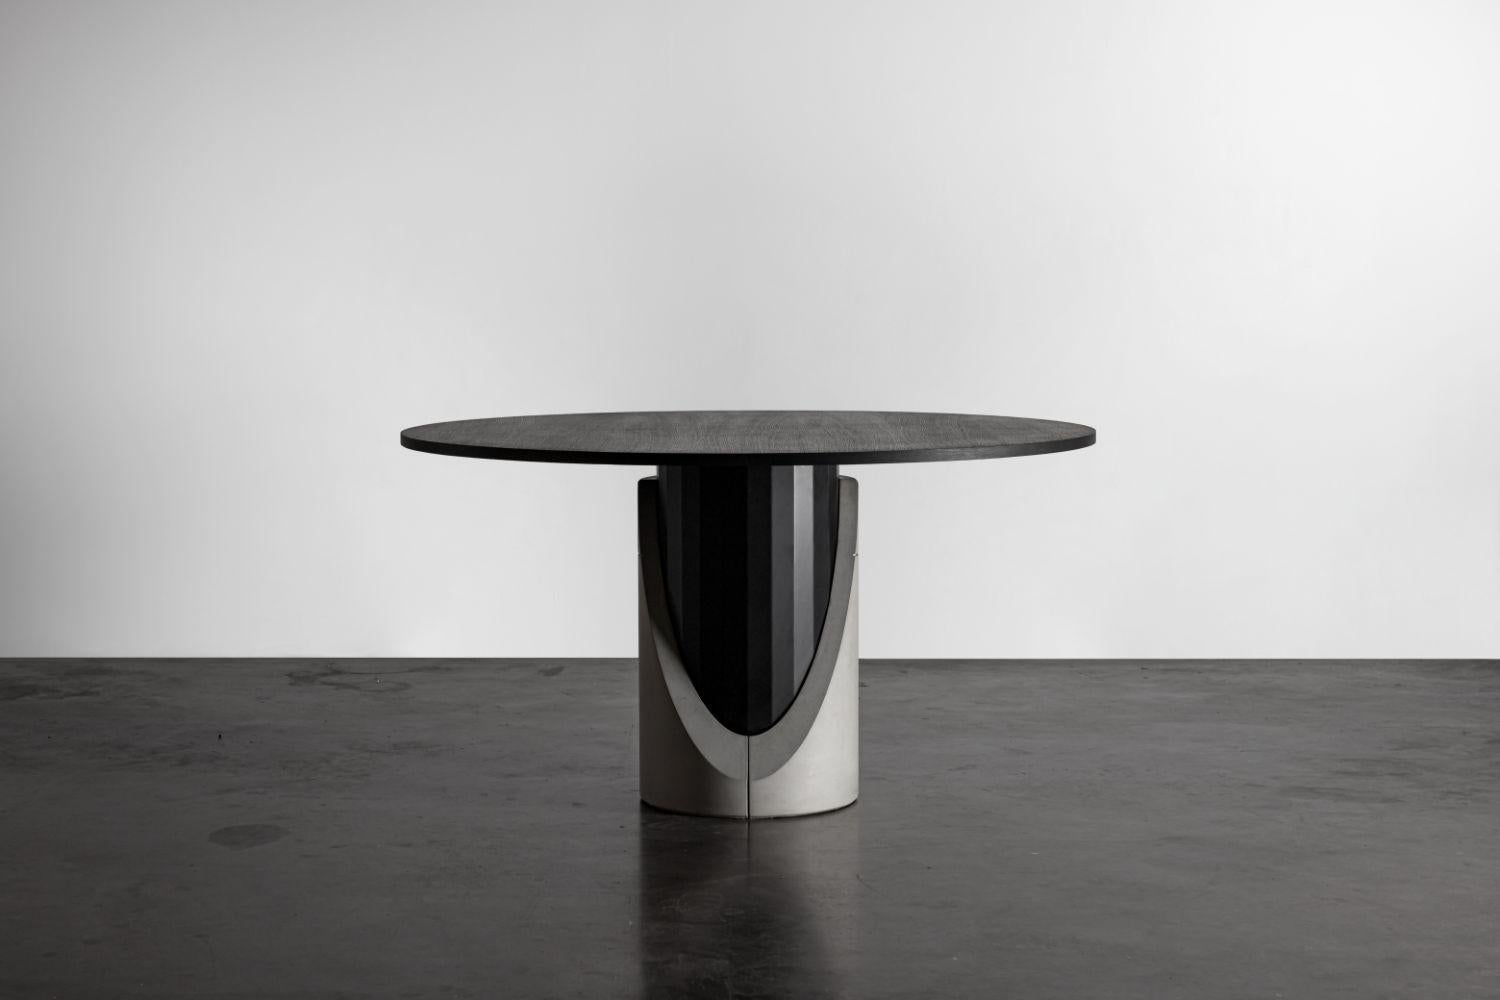 With the Sharp dining table, designer Bertrand Jayr destructures the symbiosis between concrete and metal. The reversible concrete ballast protects and reveals a black metal shaft with delicate facets. The oak veneer tabletop is tinted with a deep